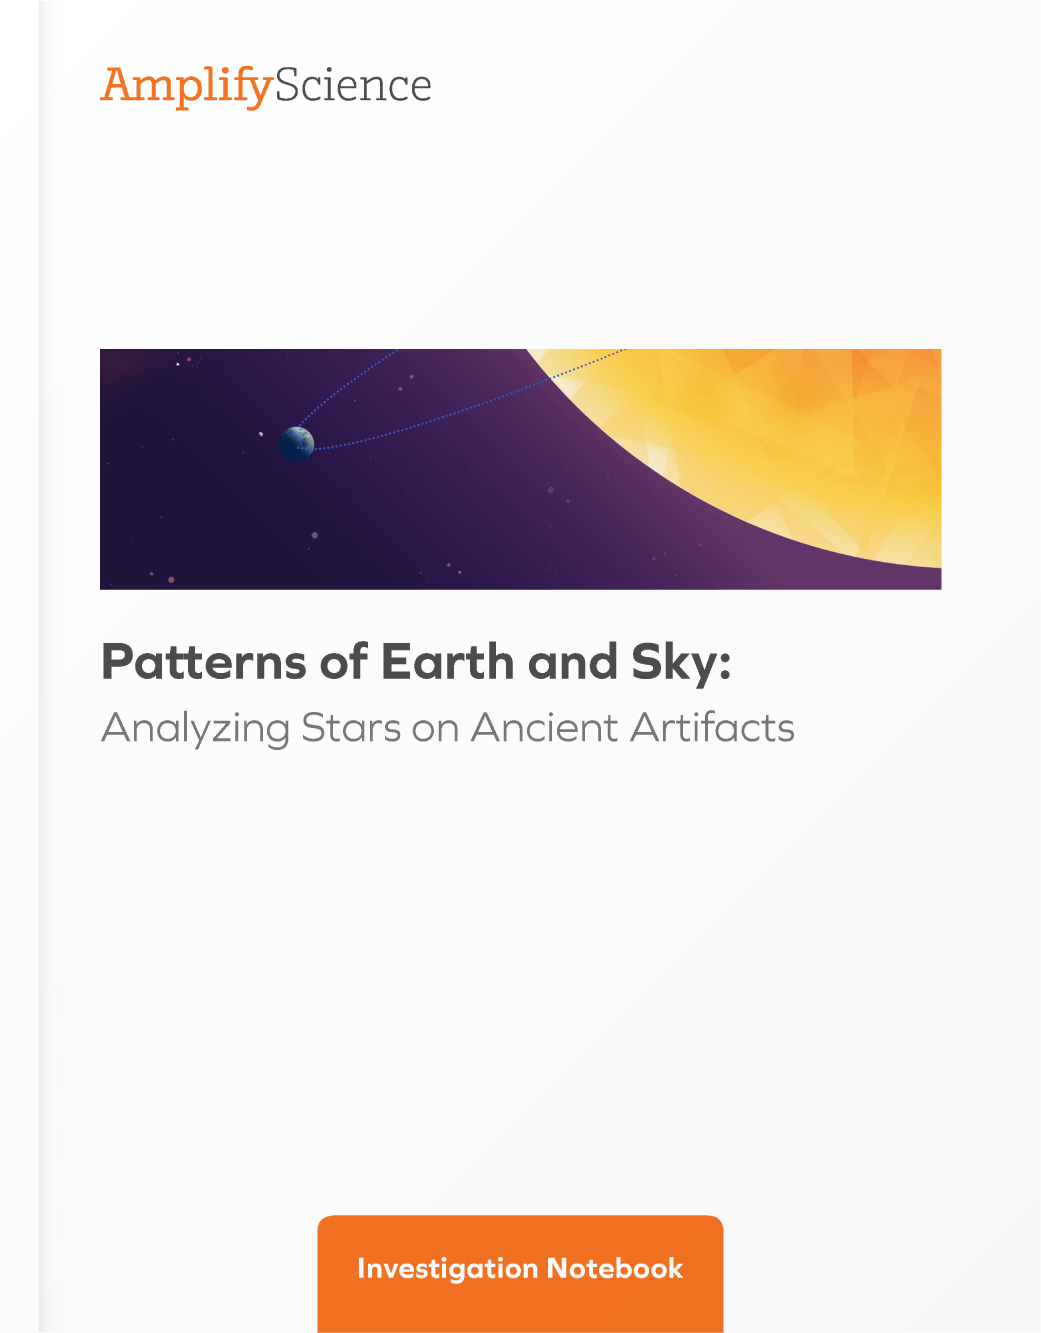 Amplify Science Student Investigation Notebook Patterns of Earth and Sky